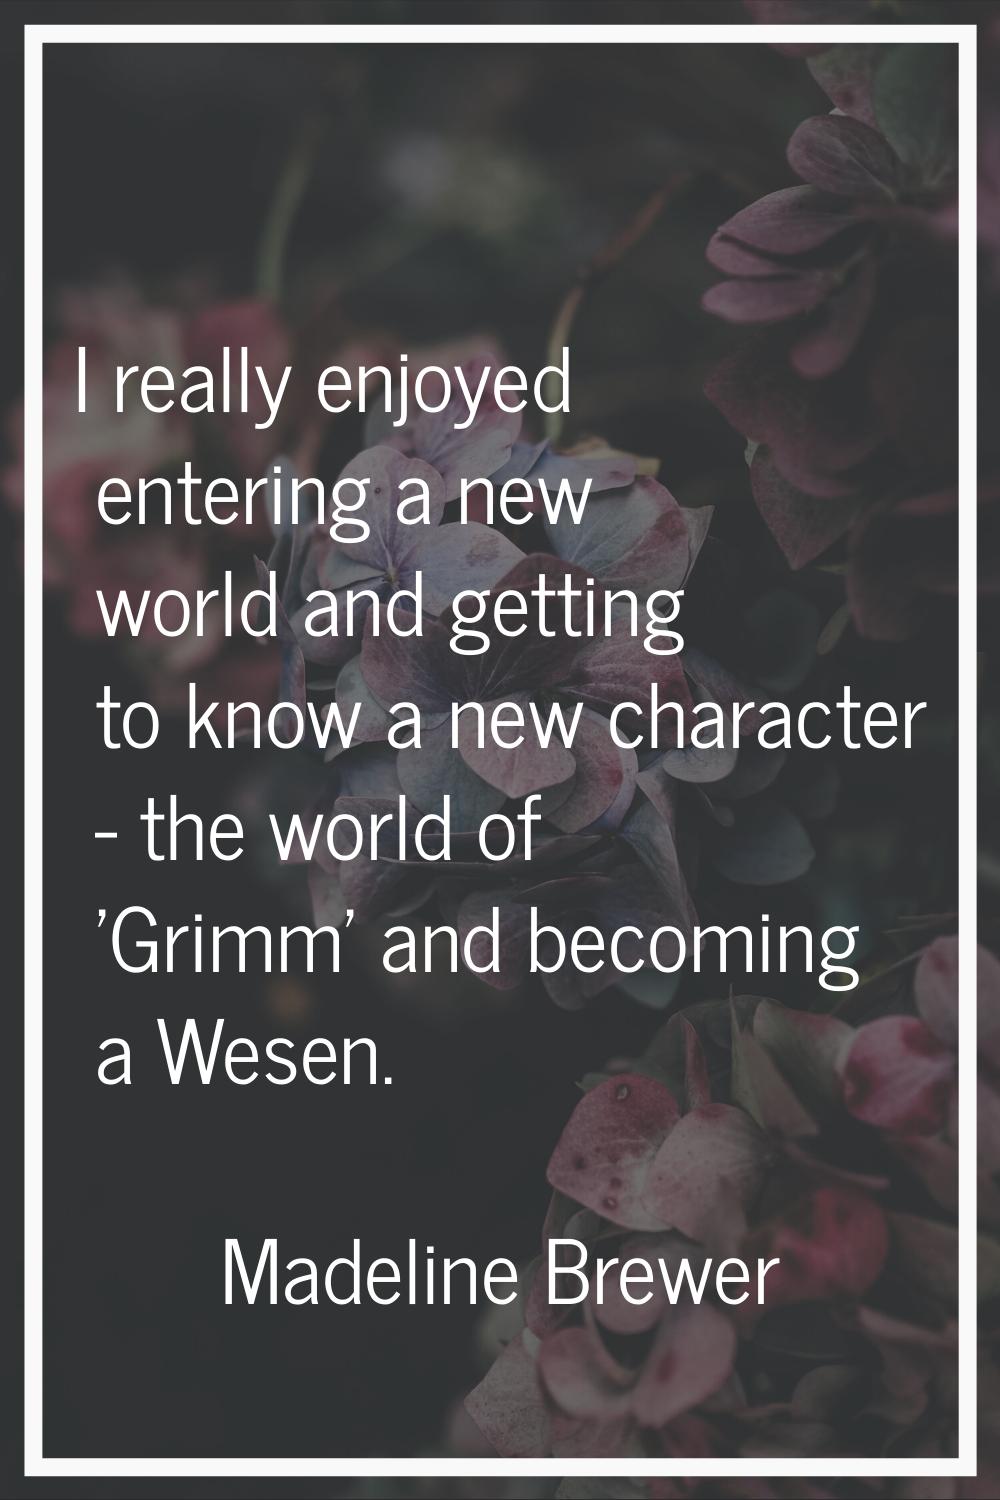 I really enjoyed entering a new world and getting to know a new character - the world of 'Grimm' an